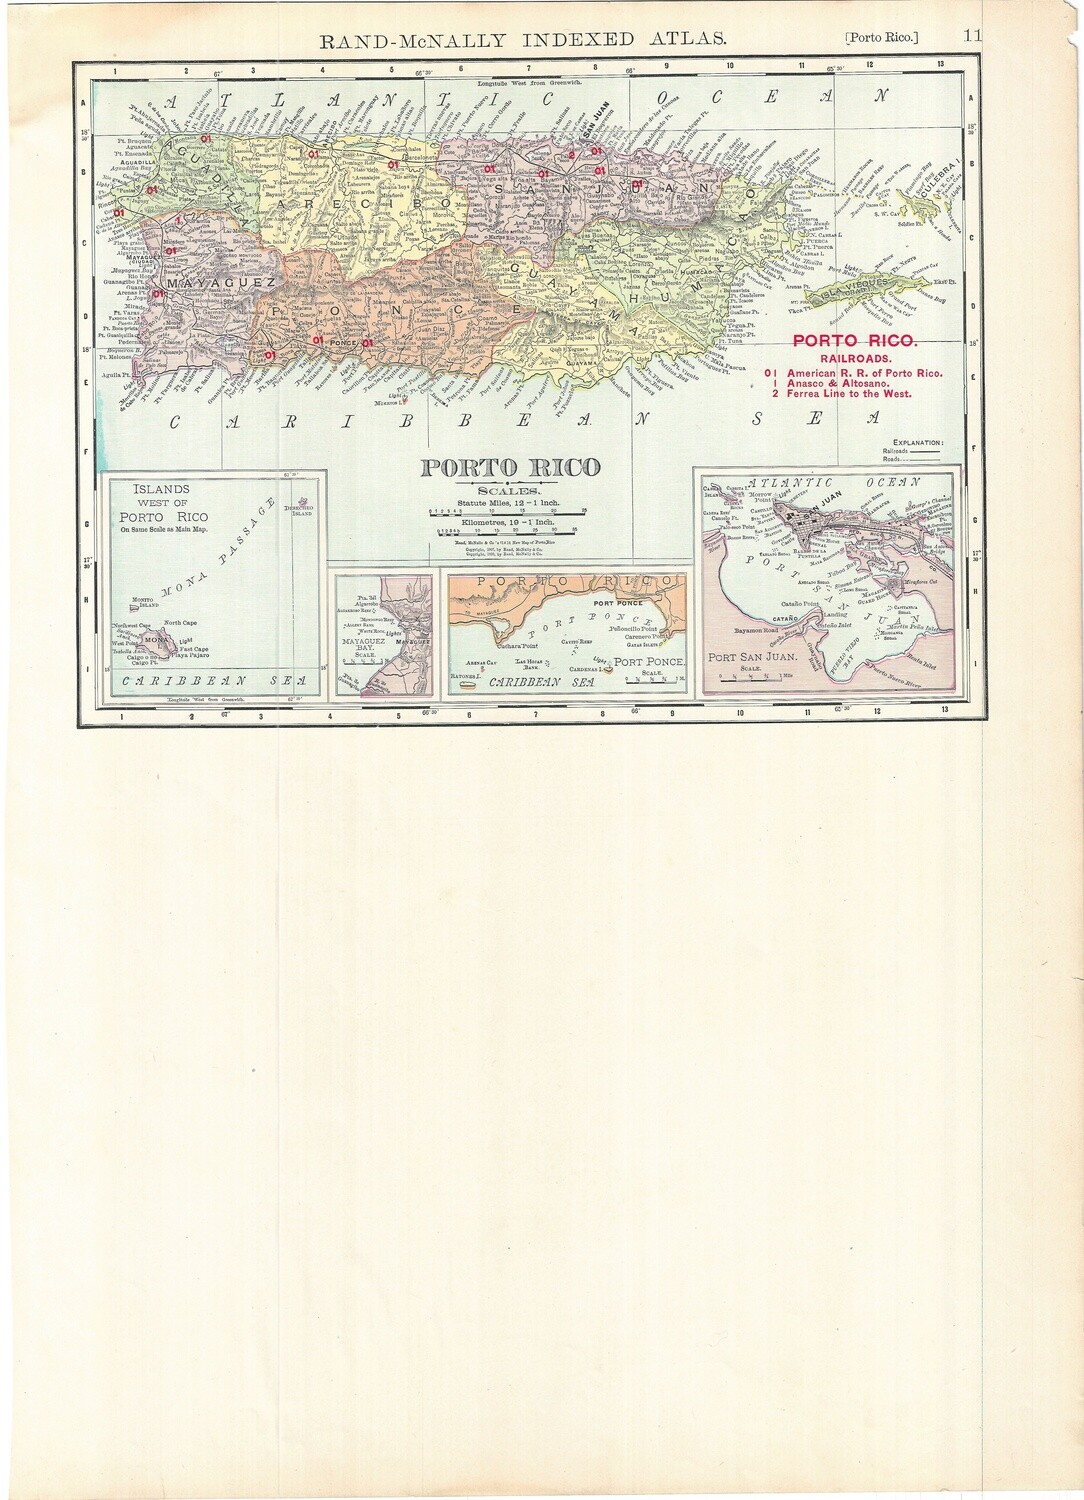 1912 Railroad Map of Porto Rico by Rand McNally in Chromolithography